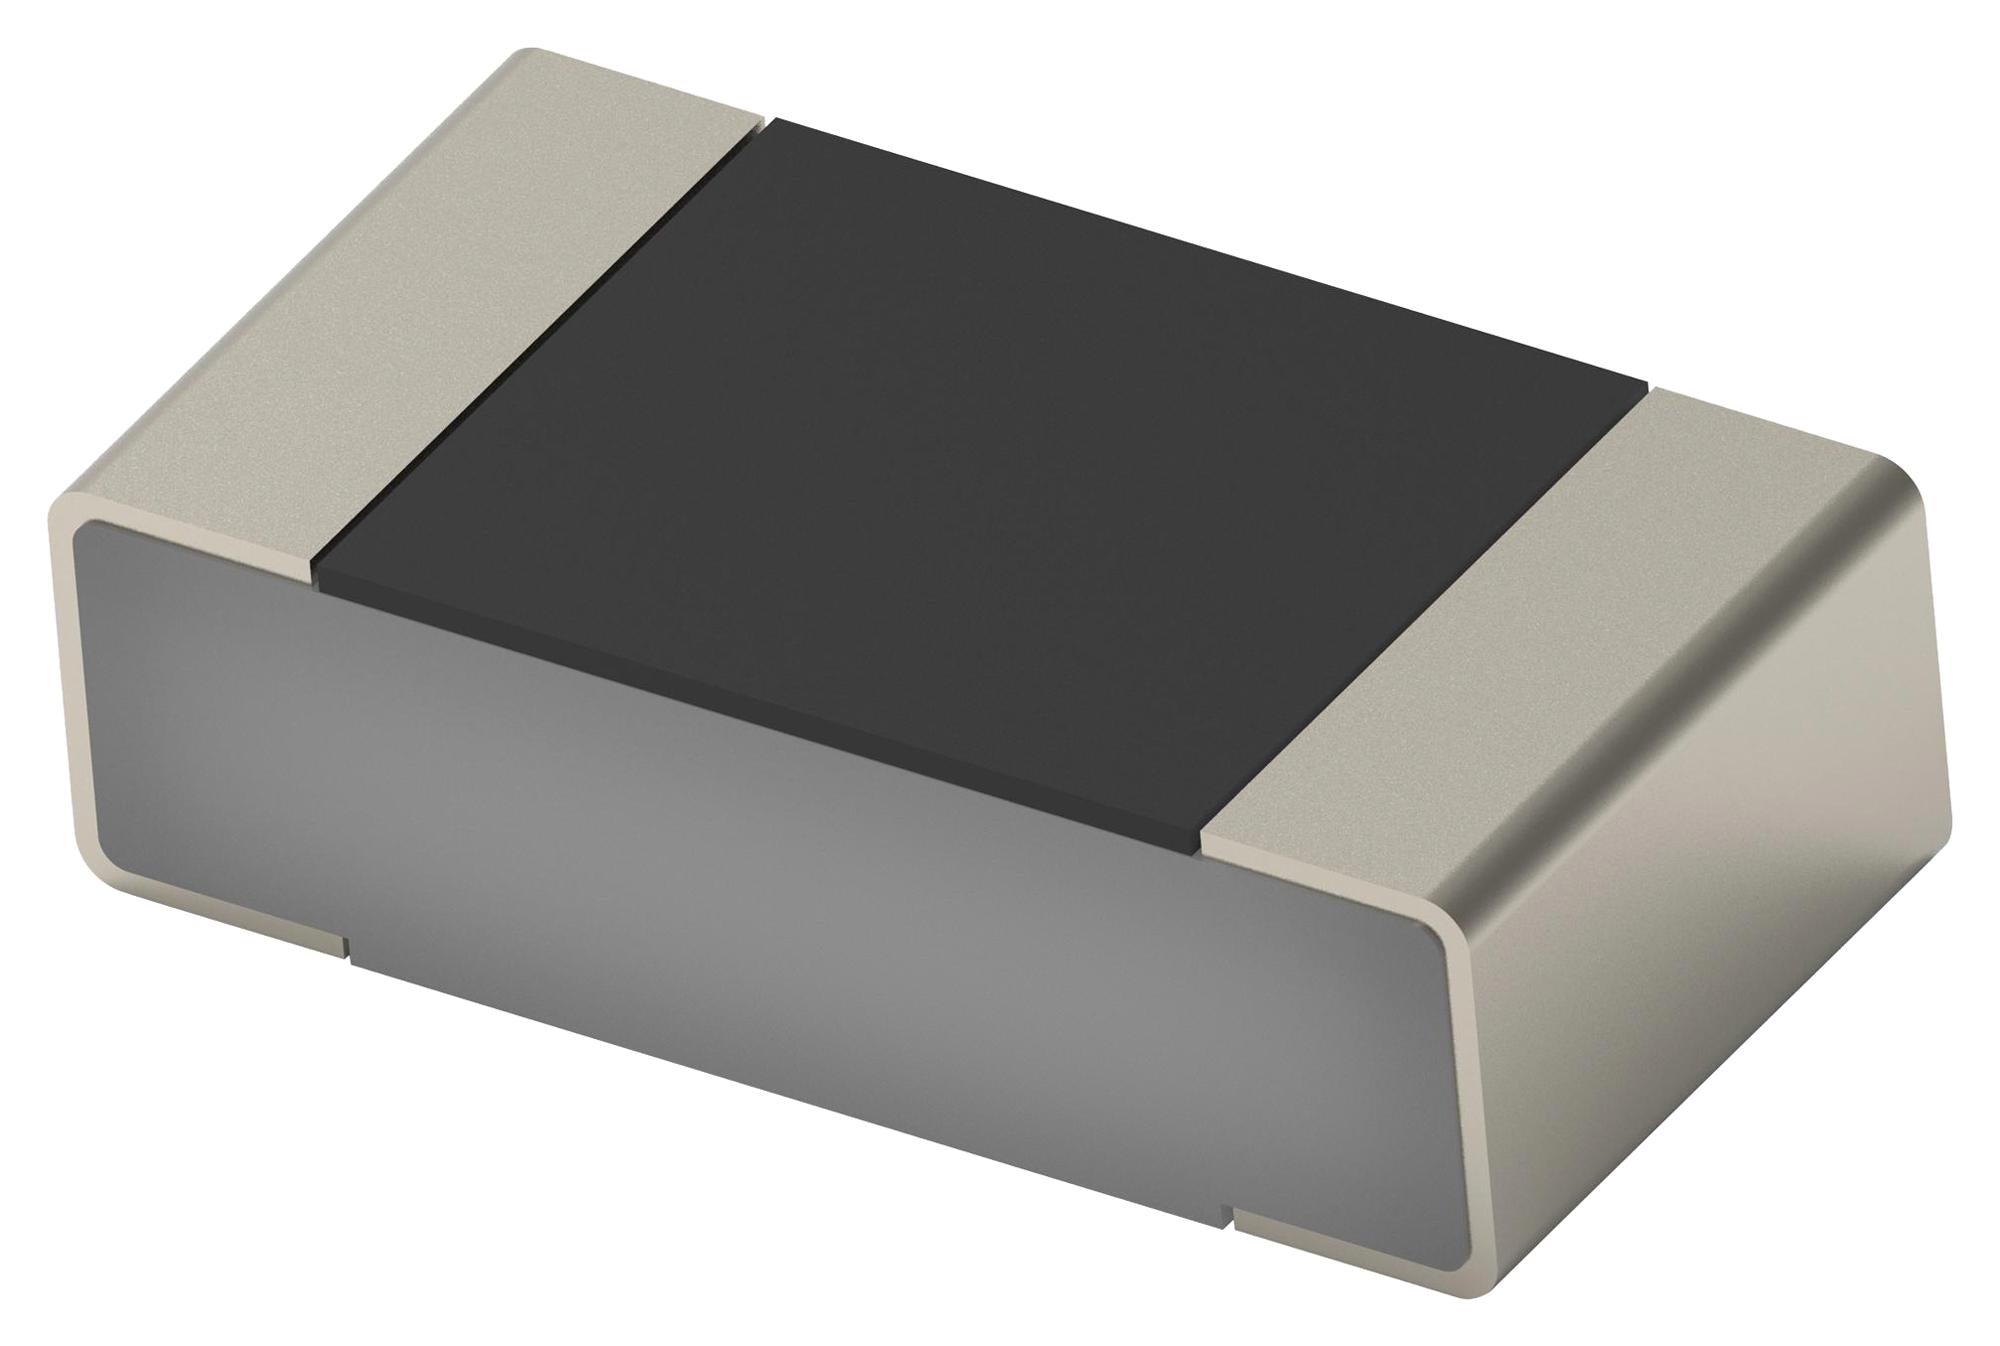 TLRP2B10WR015FTD RES, 0R015, 1W, 1206, METAL STRIP CGS - TE CONNECTIVITY